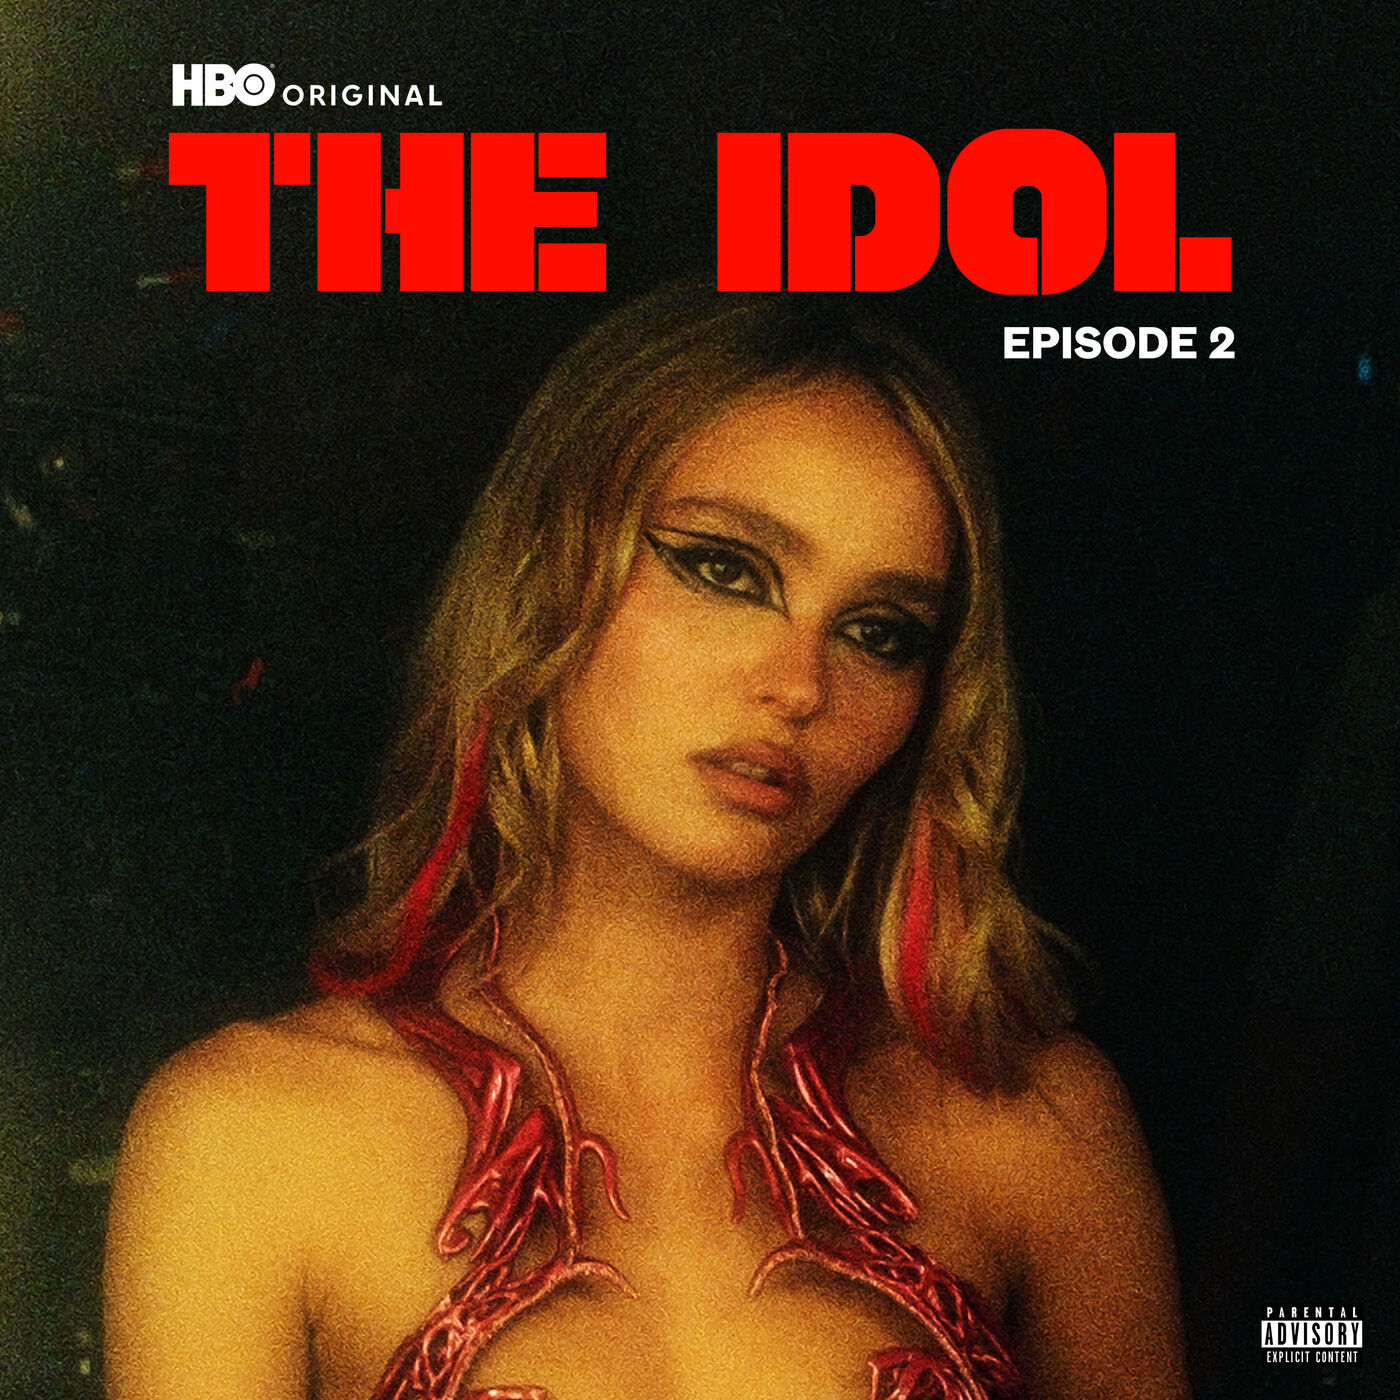 The Weeknd – The Idol Episode 2 (Music from the HBO Original Series)Ⓔ【44.1kHz／16bit】美国区-OppsUpro音乐帝国